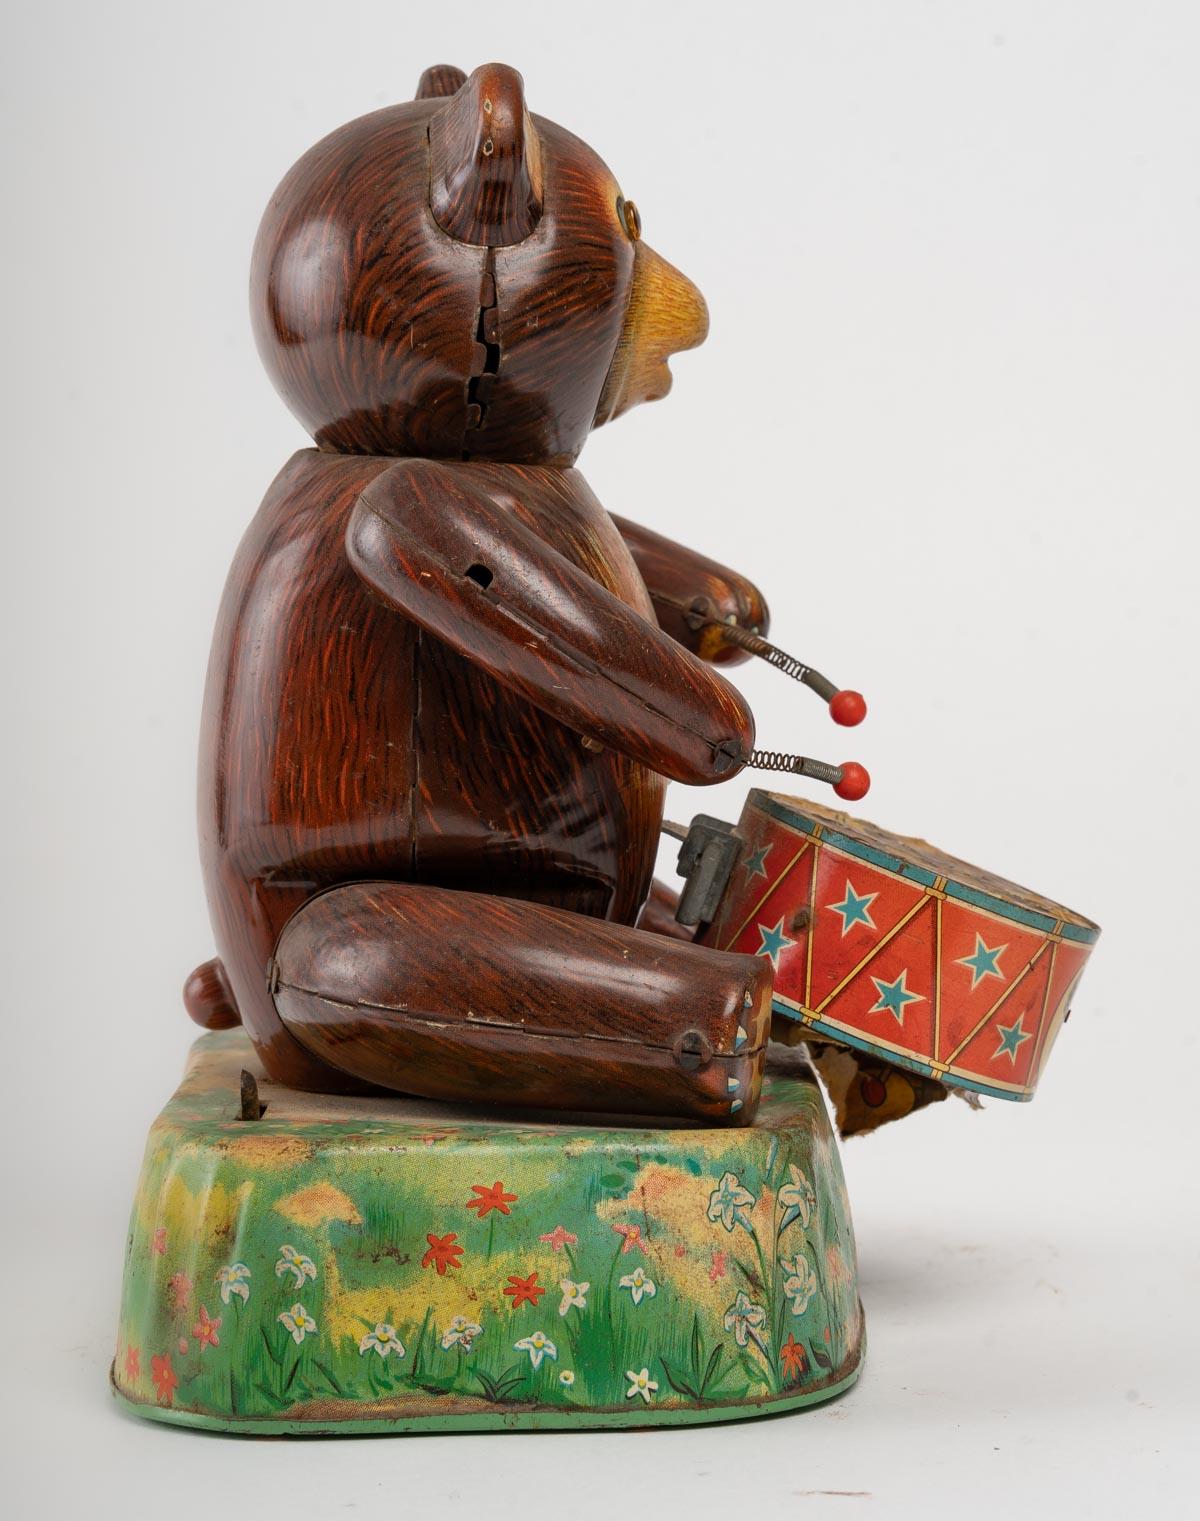 Tin toy, Bear with tambourine, not working, to be restored, very decorative.
Measures: H: 24 cm, W: 19 cm, D: 19 cm.